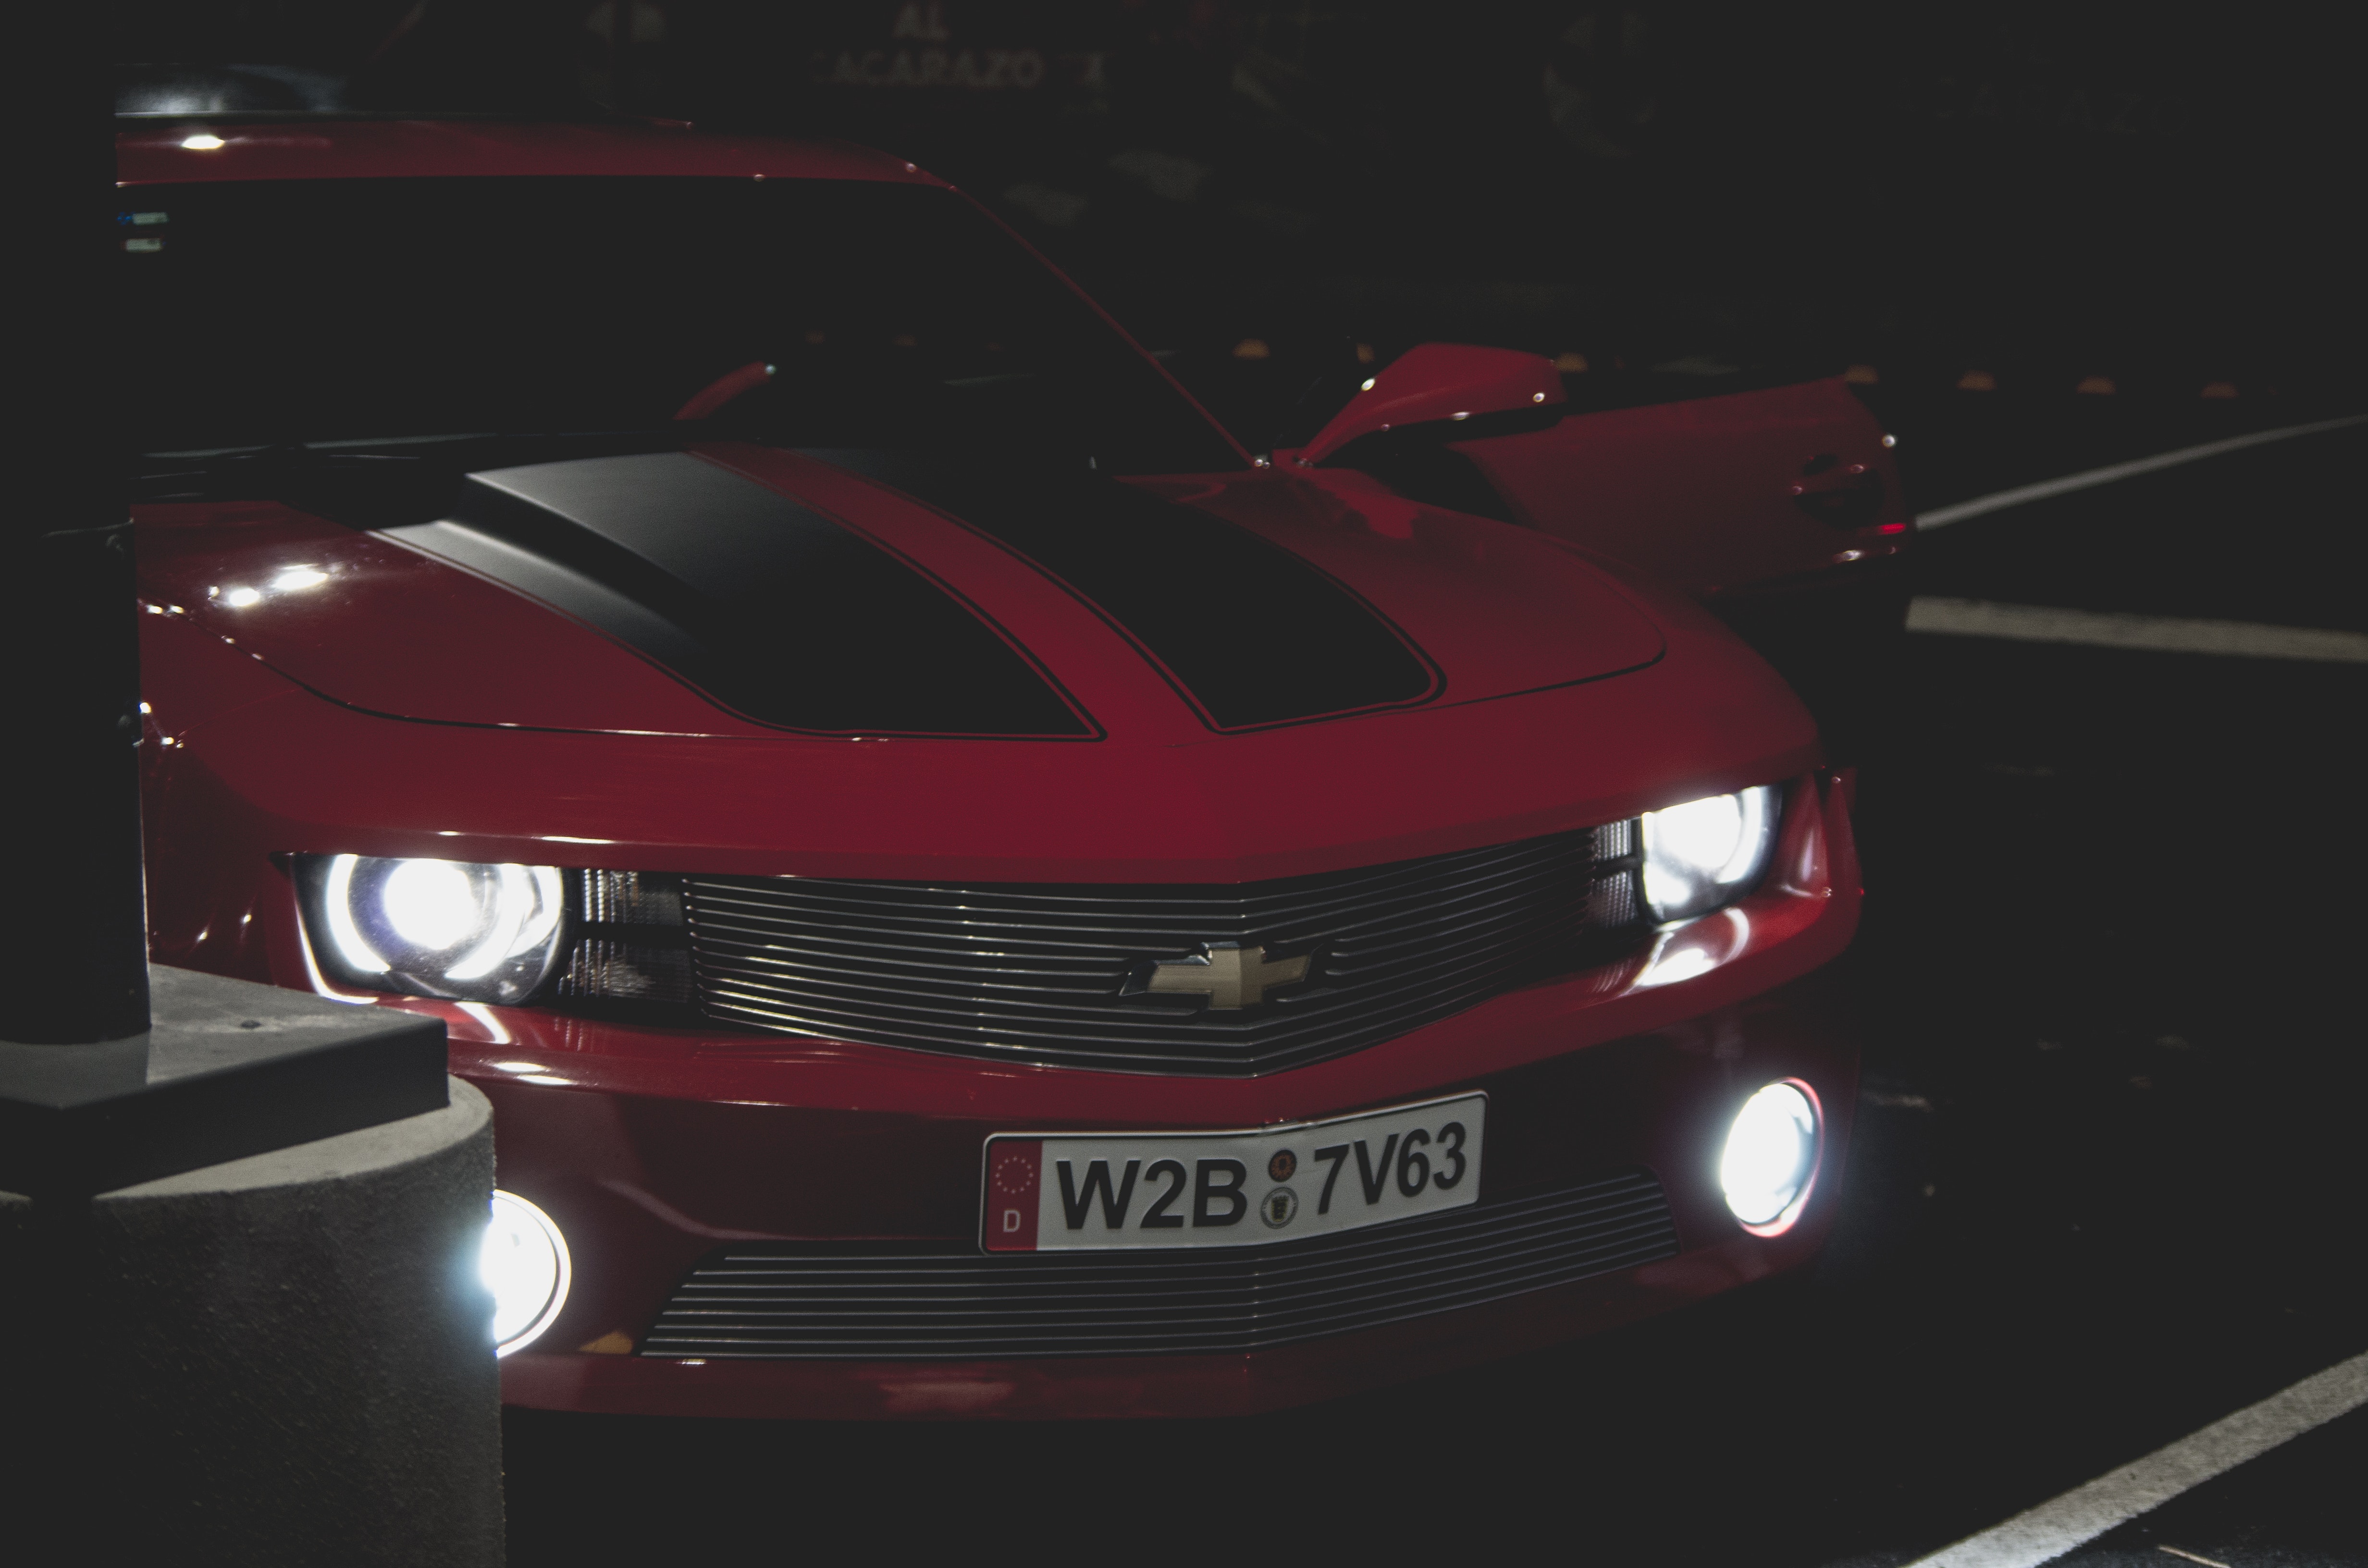 chevrolet camaro, cars, lights, front view, headlights, front bumper